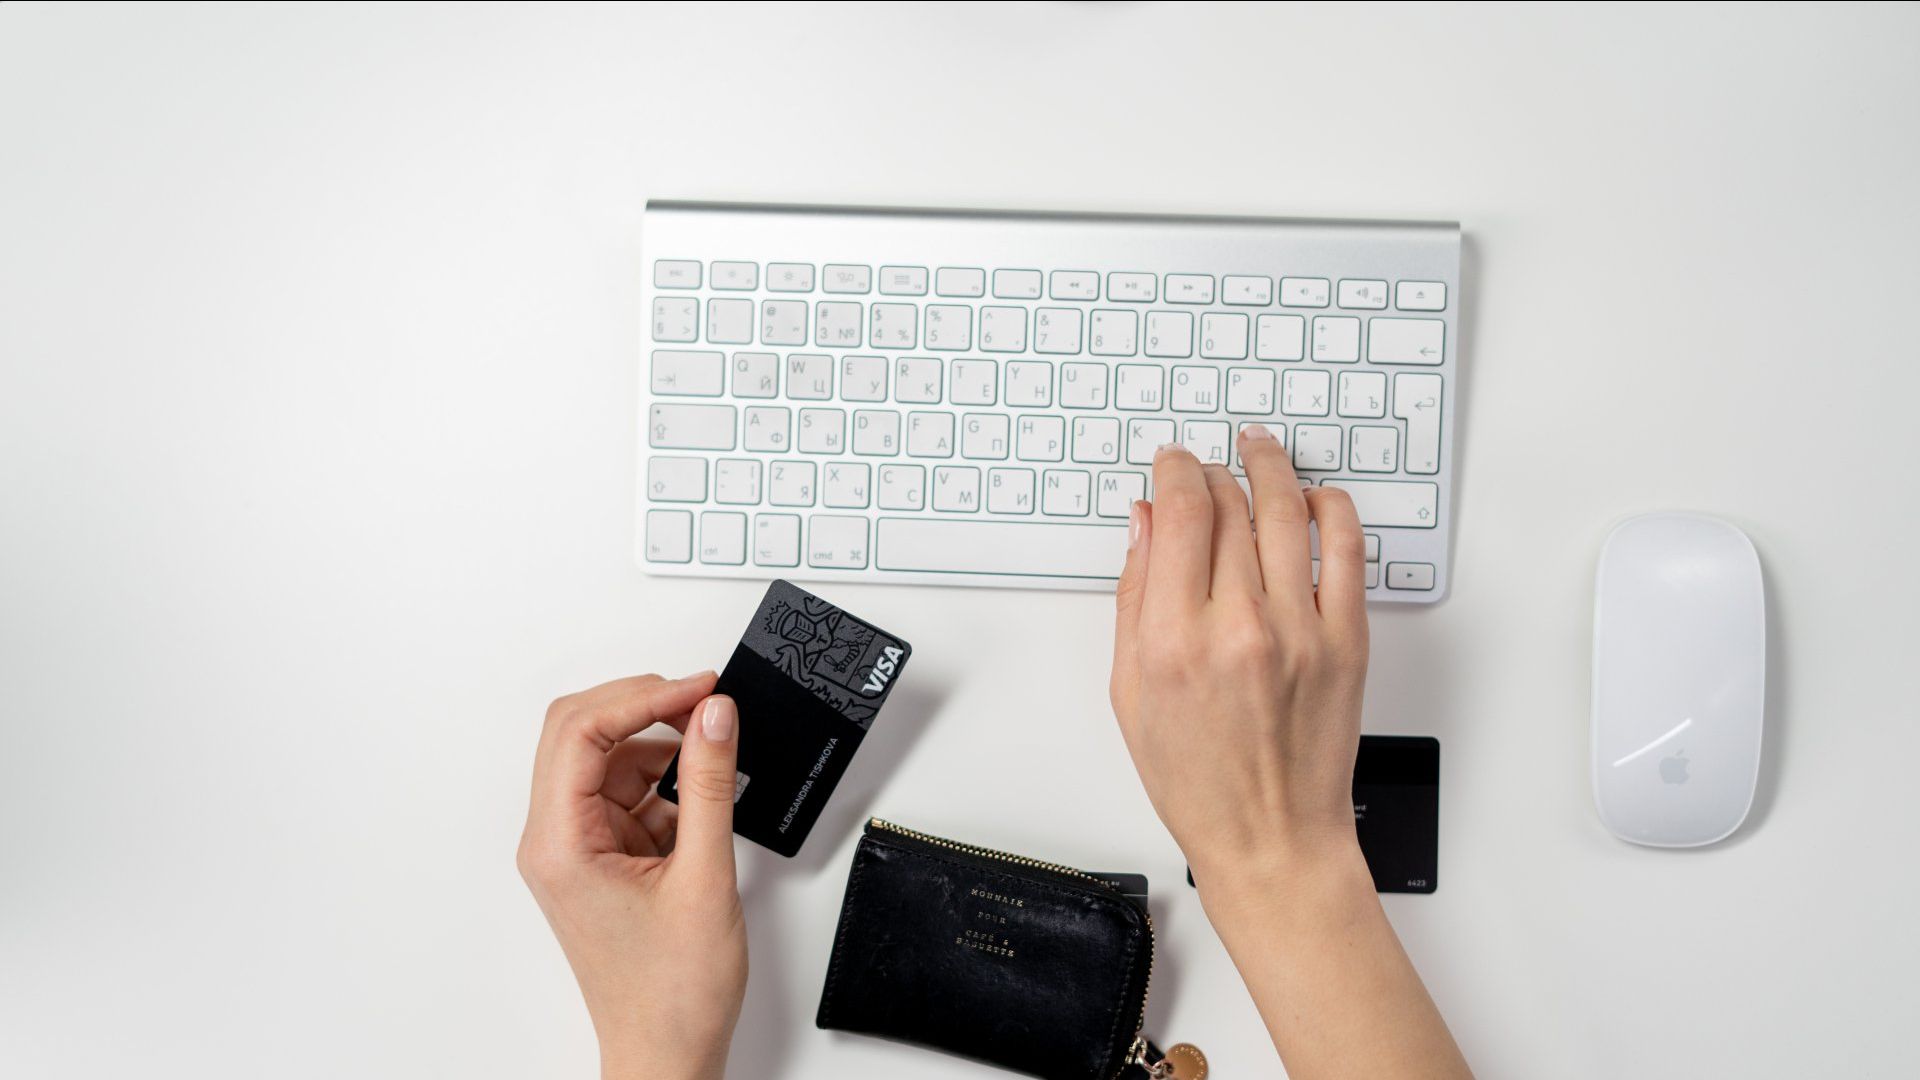 Hand holding a credit card and keyboard